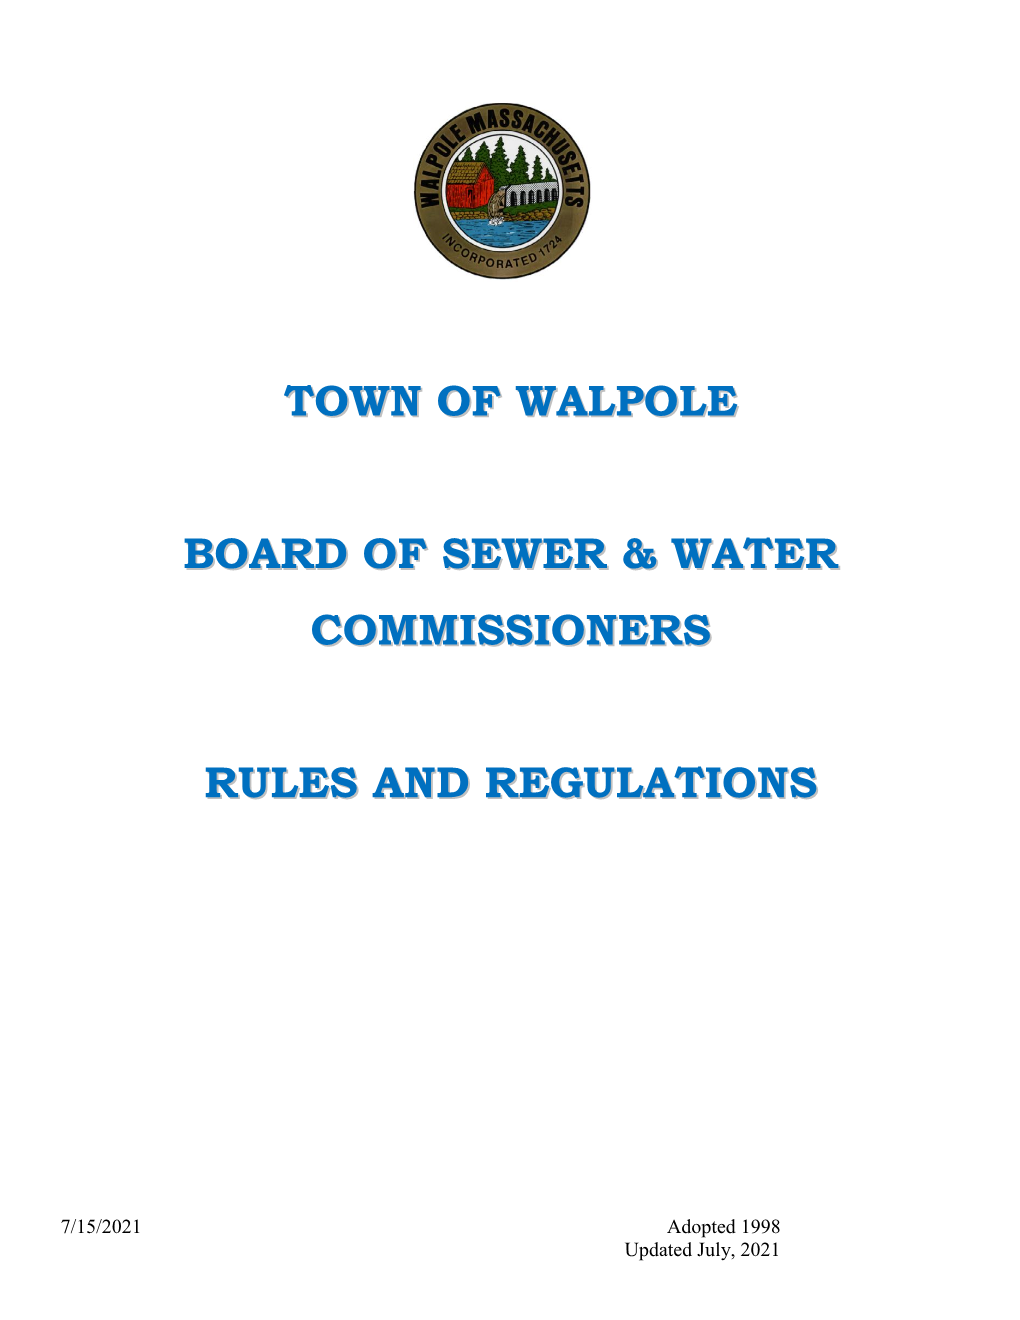 Sewer and Water Rules and Regulations